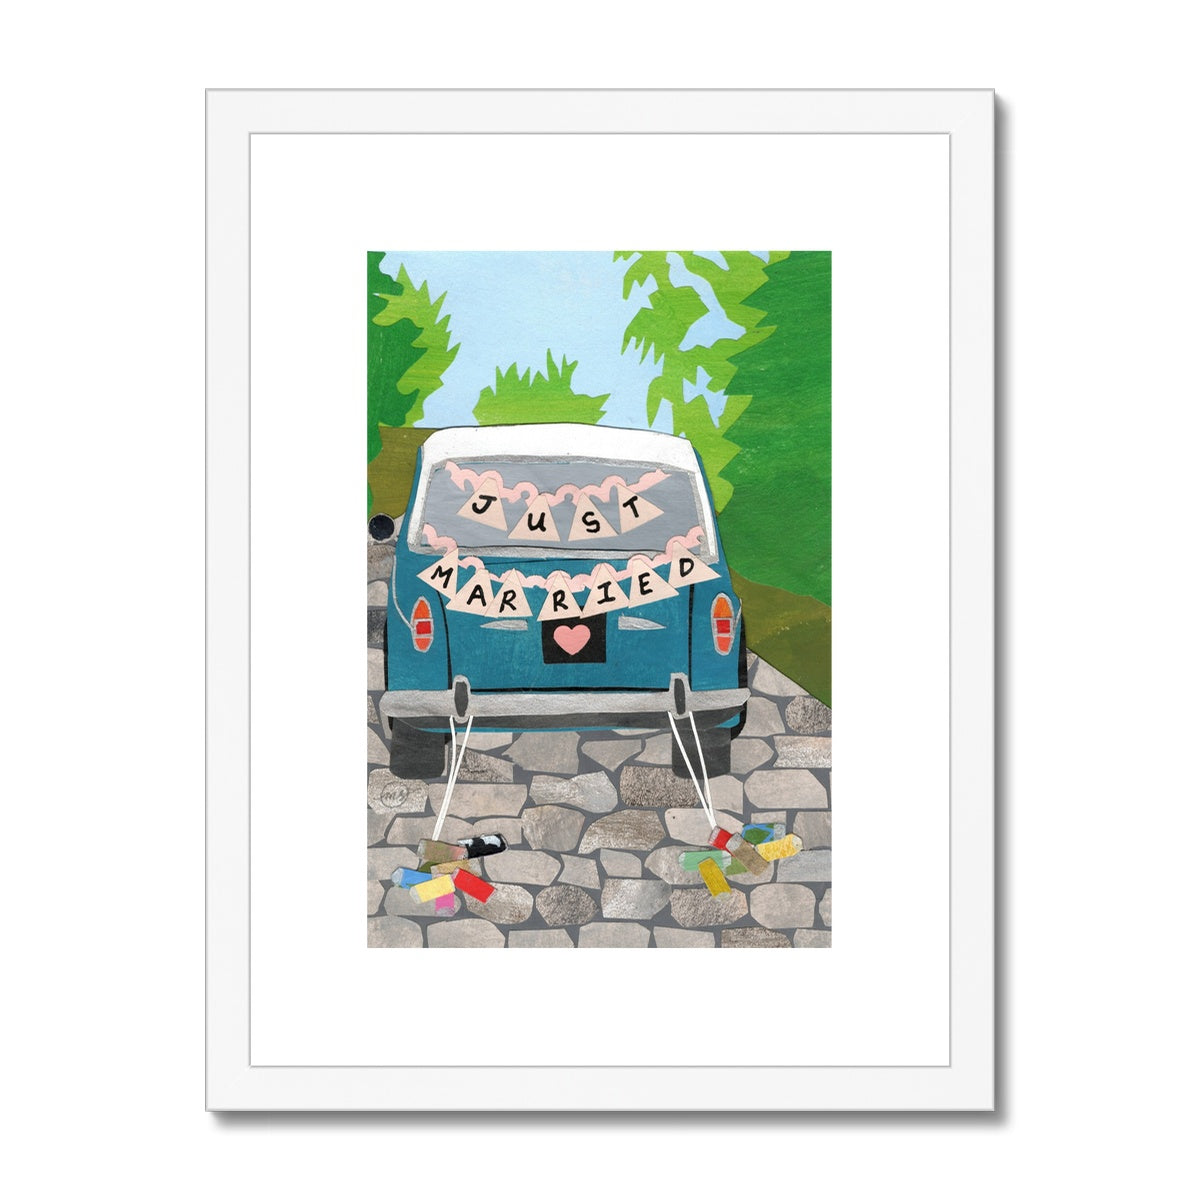 Just Married Framed & Matted Print